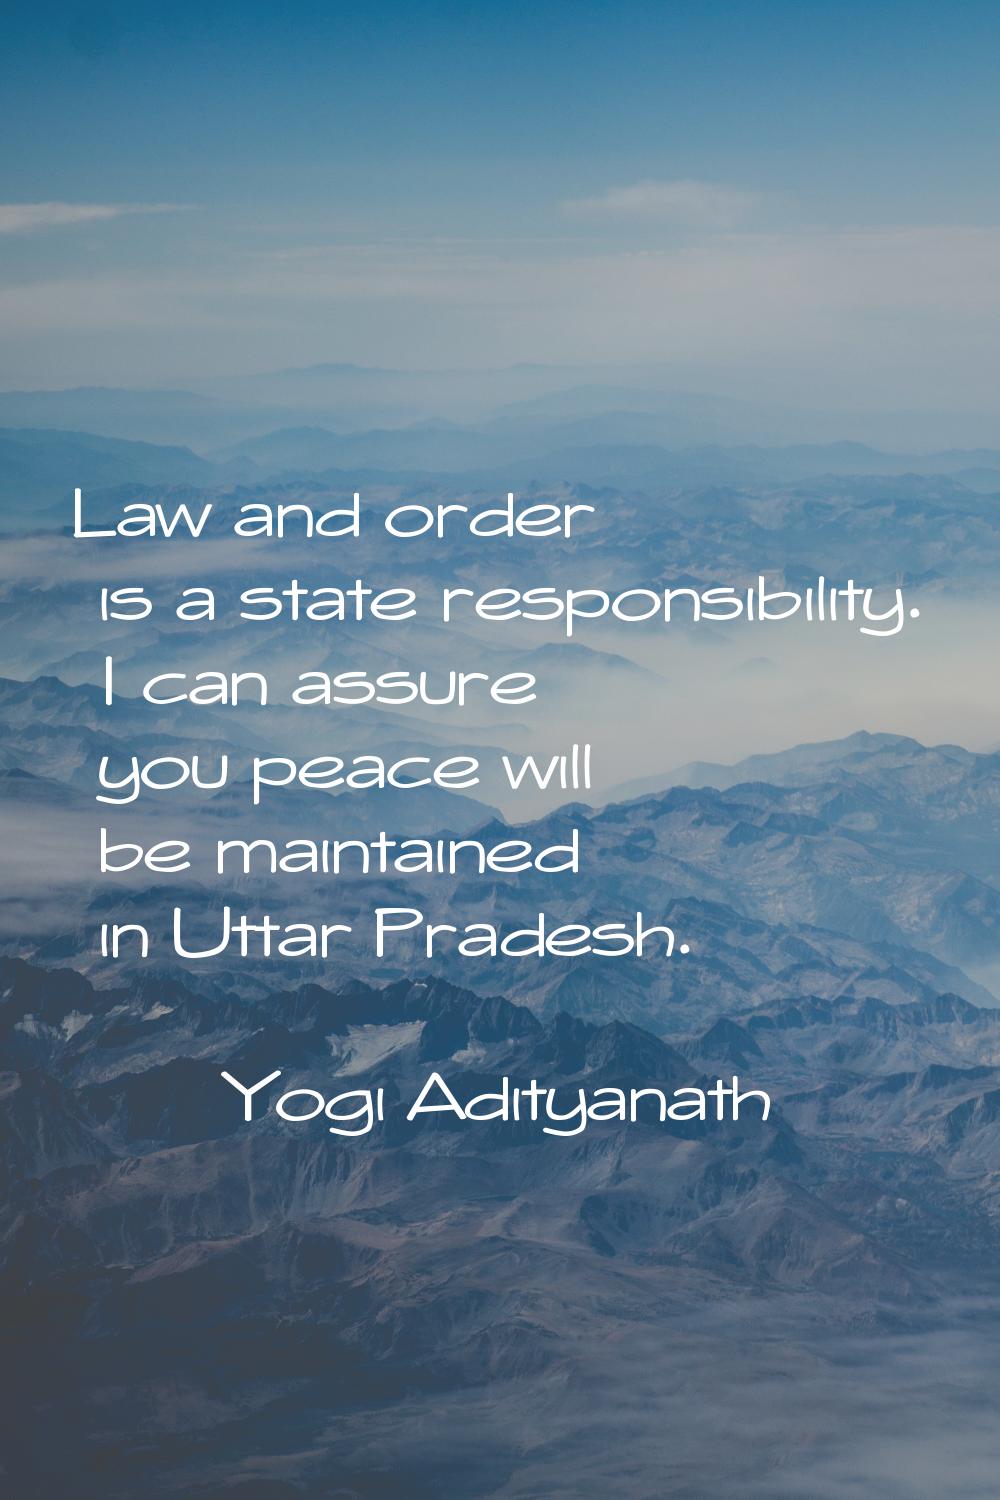 Law and order is a state responsibility. I can assure you peace will be maintained in Uttar Pradesh